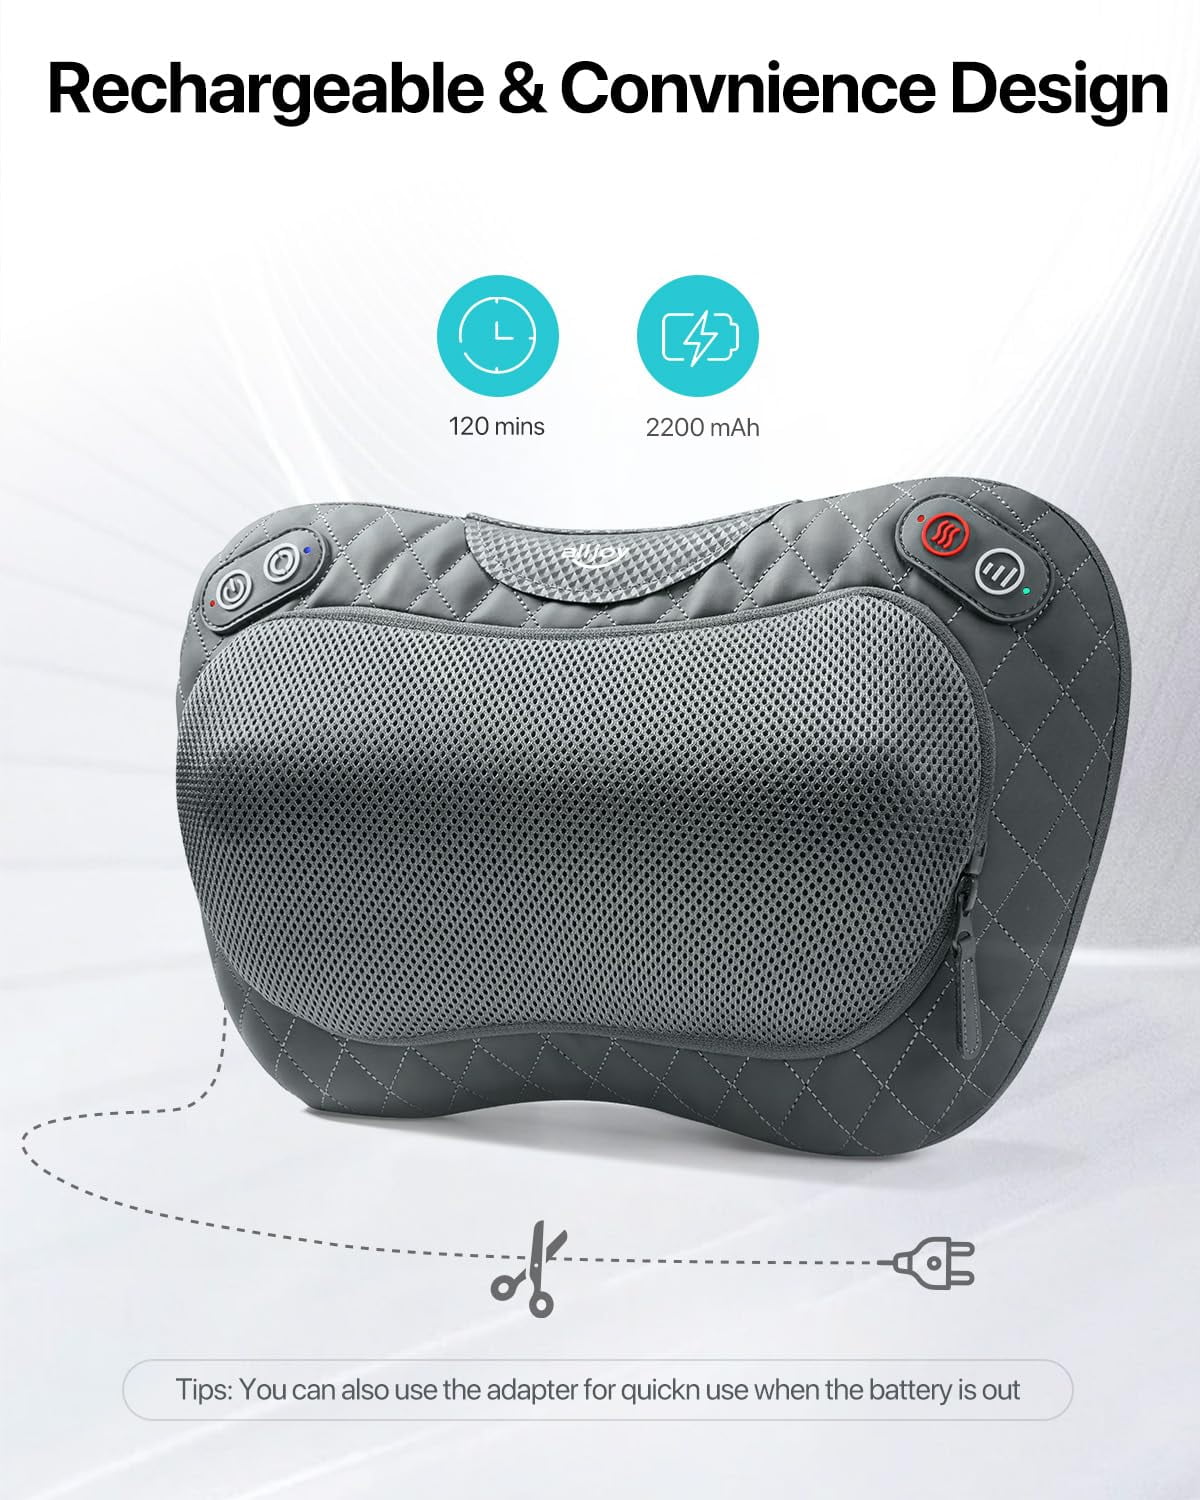  ALLJOY Cordless Neck Massager with Heat, Rechargeable